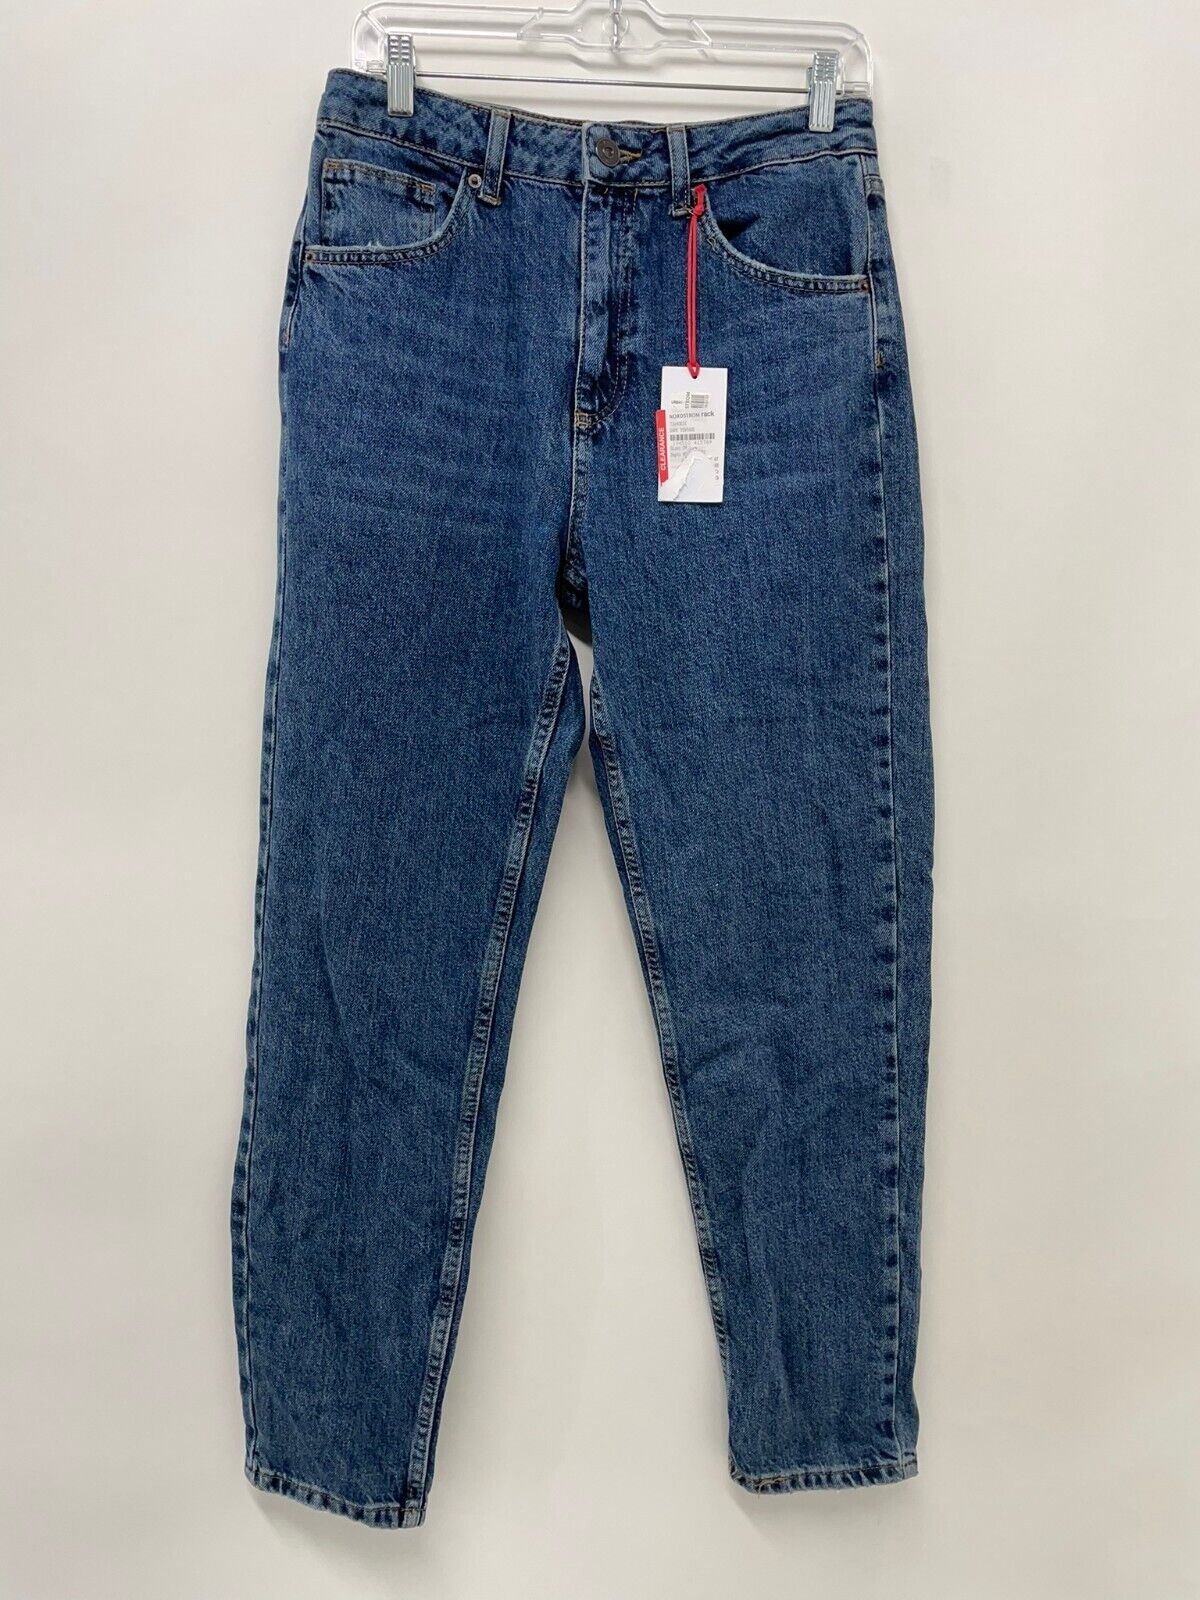 BDG Urban Outfitters Womens 29 Mom Jeans Denim Dark Vintage Wash Tapered